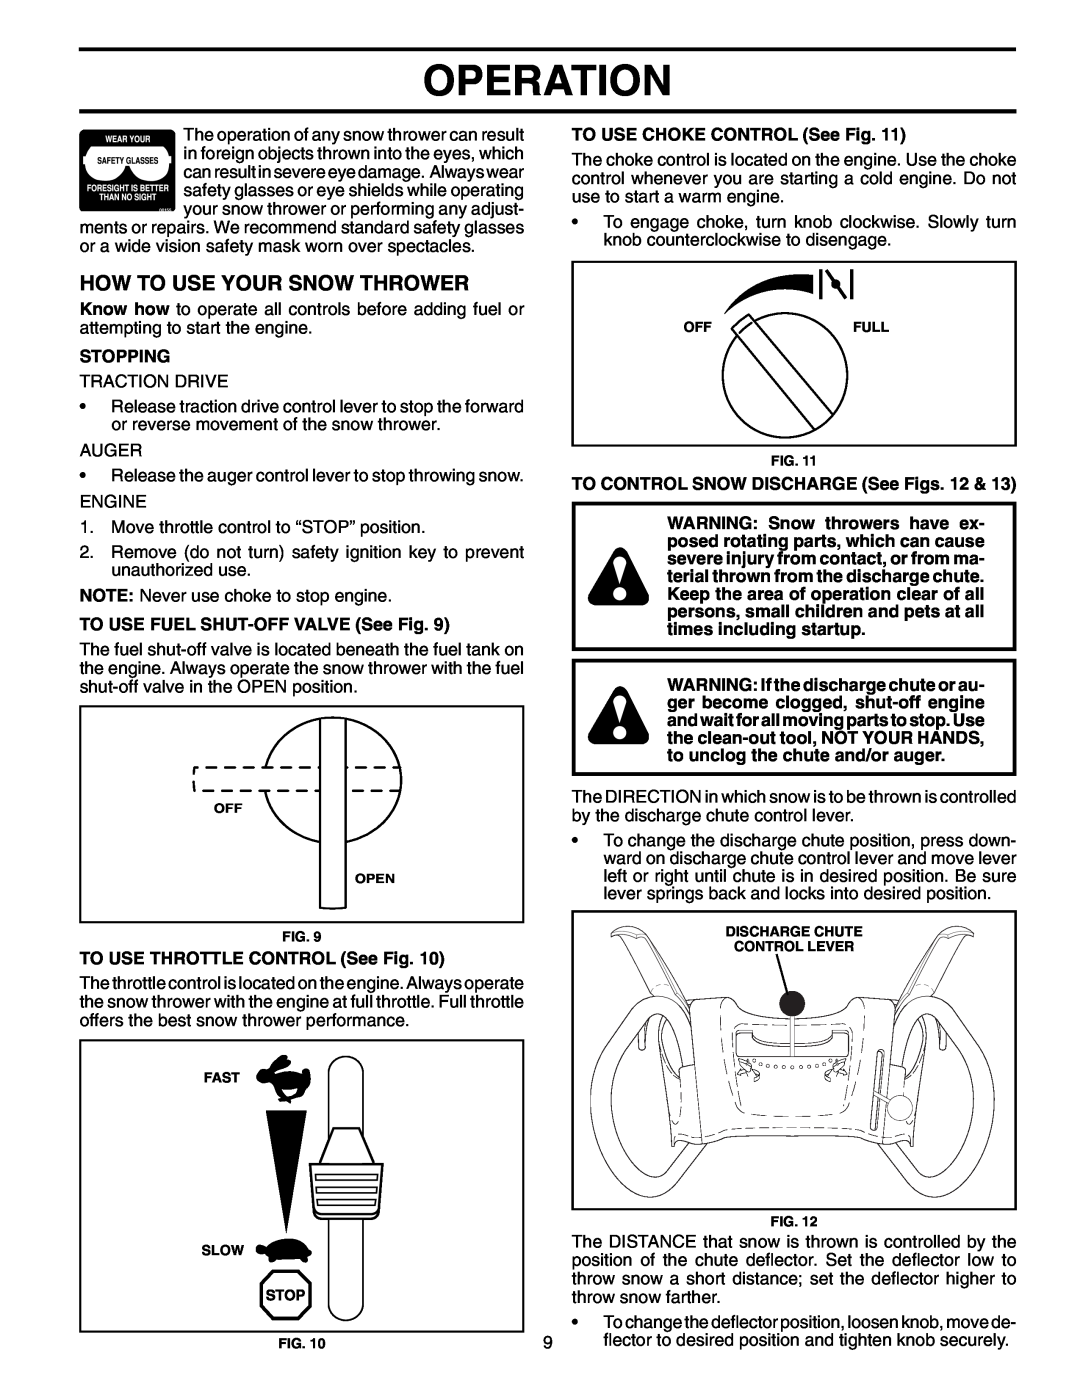 Poulan 199434 owner manual How To Use Your Snow Thrower, Operation, TO USE CHOKE CONTROL See Fig, Stopping 